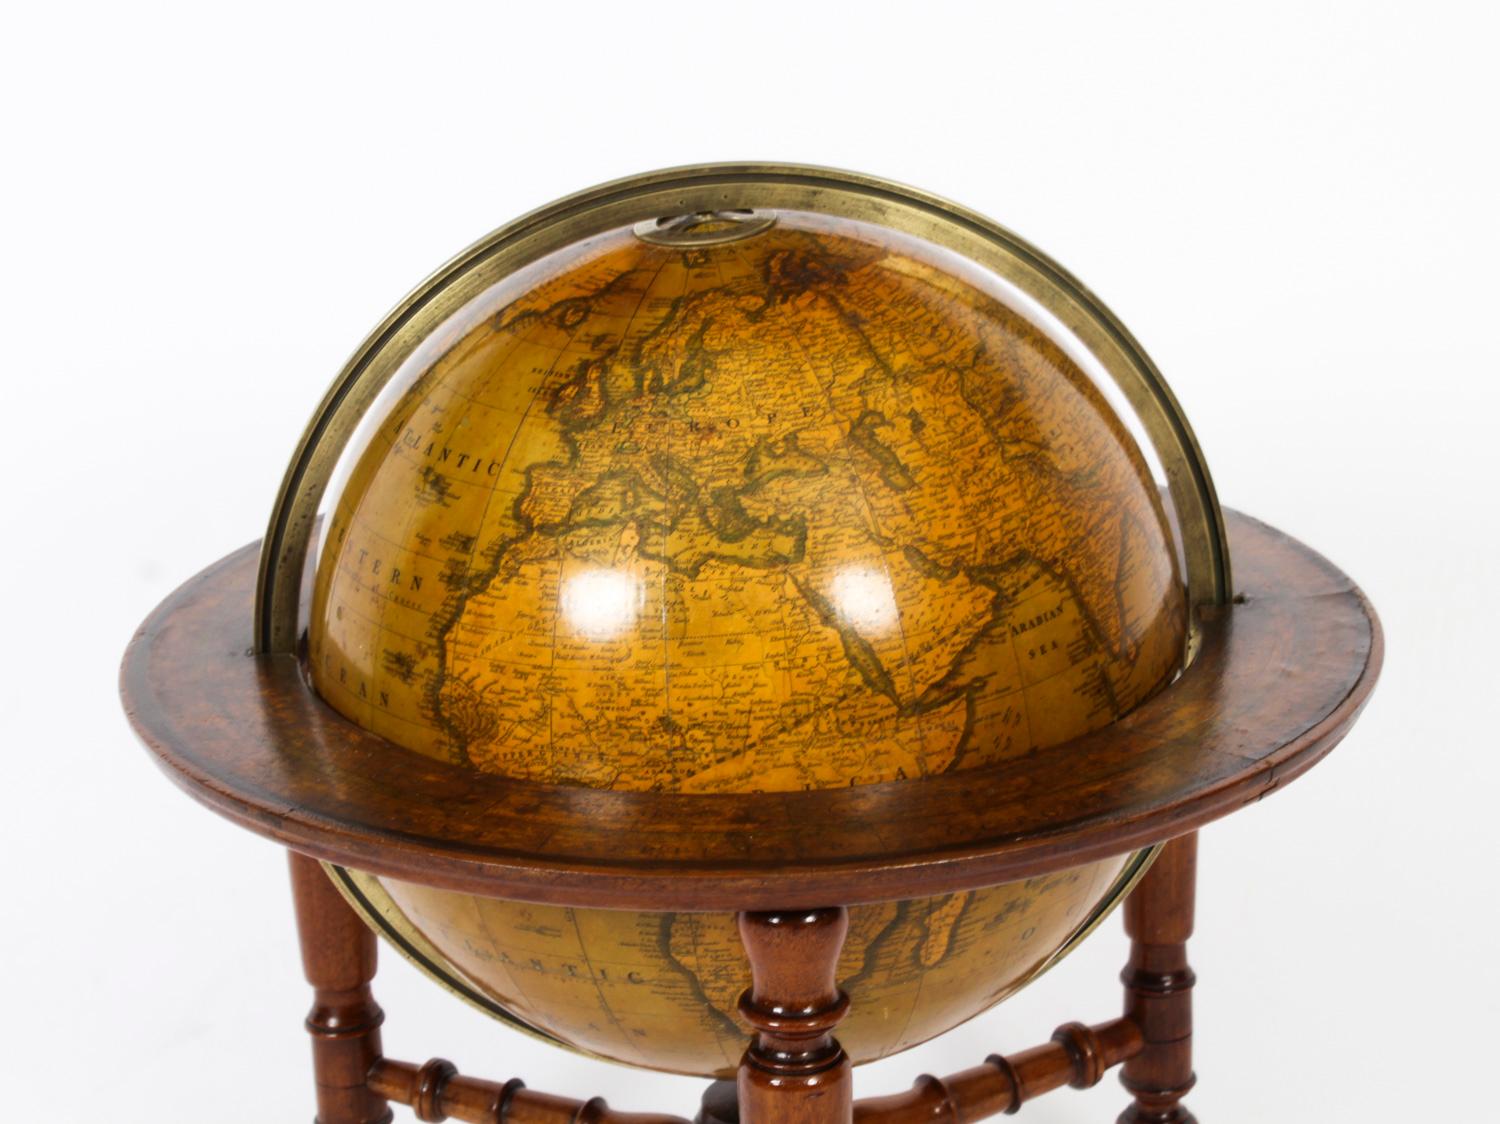 English Antique Victorian Terrestrial Library Table Globe by C.F. Cruchley, 19th C